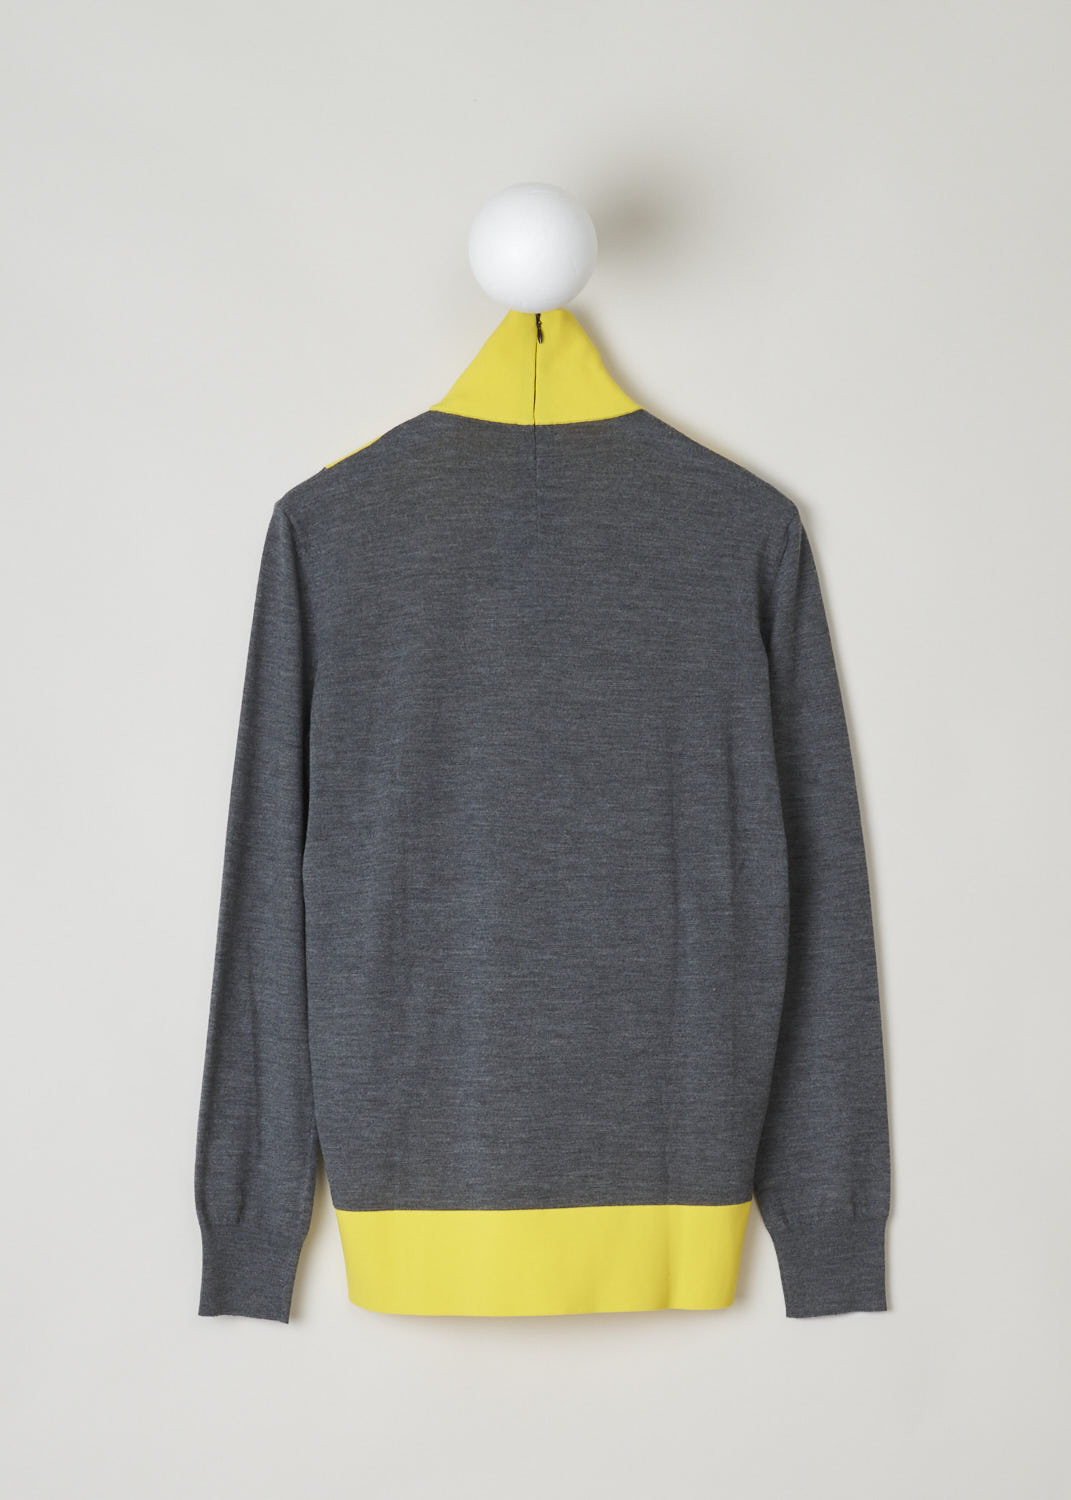 PLAN C, TWO-TONE TURTLENECK SWEATER, DVCMC51KG0_FW003_Z3050, Yellow, Grey, Back, Beautiful two-toned turtleneck. The long sleeves and back are grey and the front and neck are bright yellow. In the back of the neck, a concealed zipper can be found.